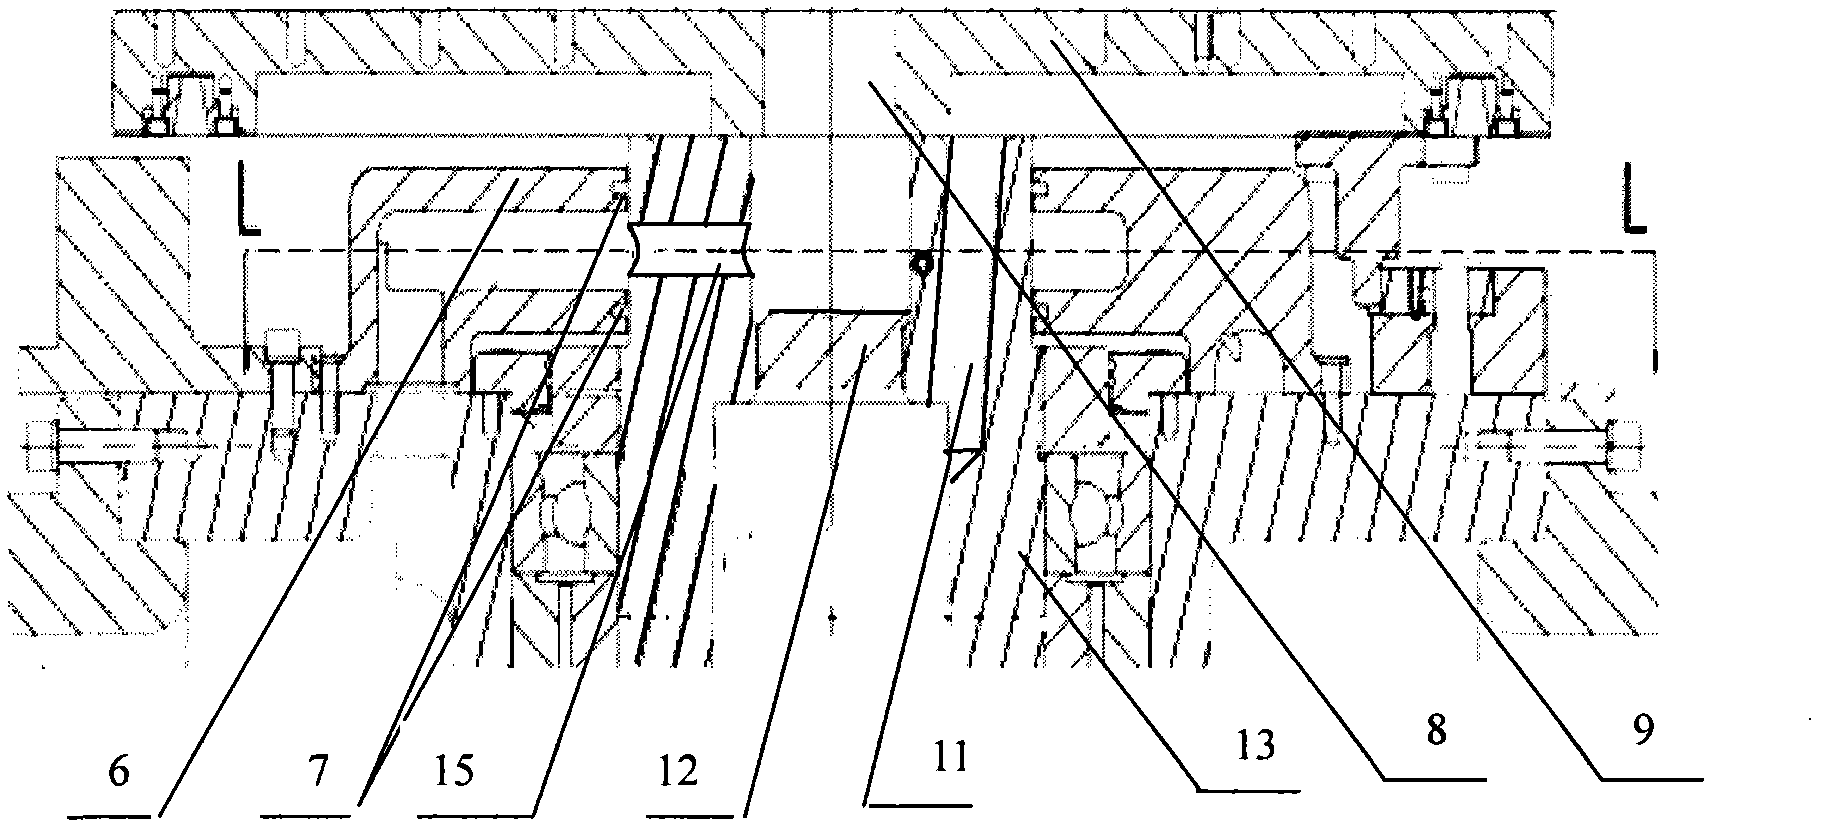 Two-shaft automatic turntable structure with built-in air ducts